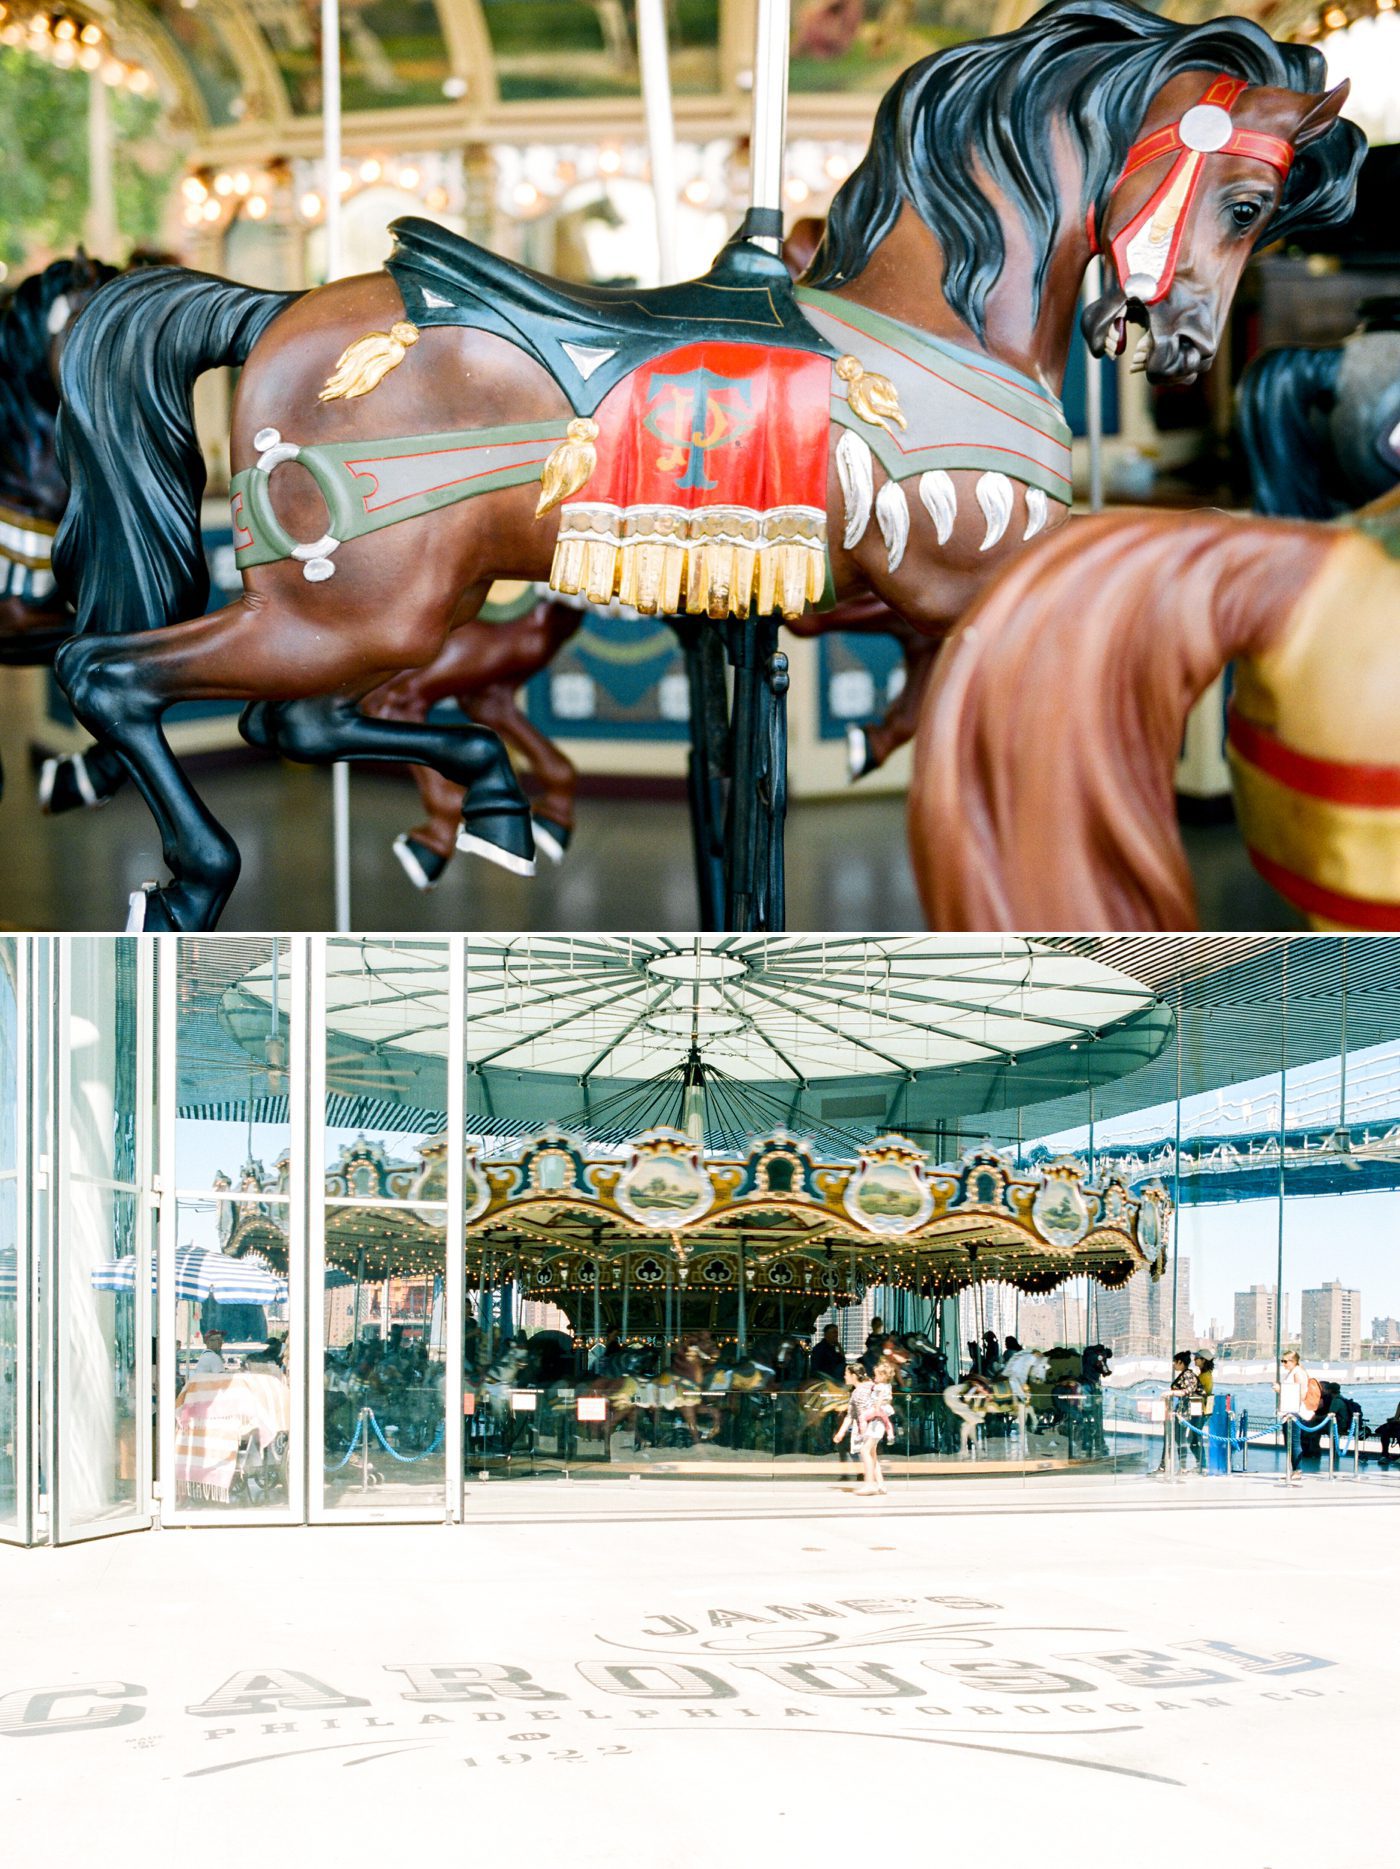 Janes Carousel in Brooklyn NY by engagement photographer Catherine Ann Photography